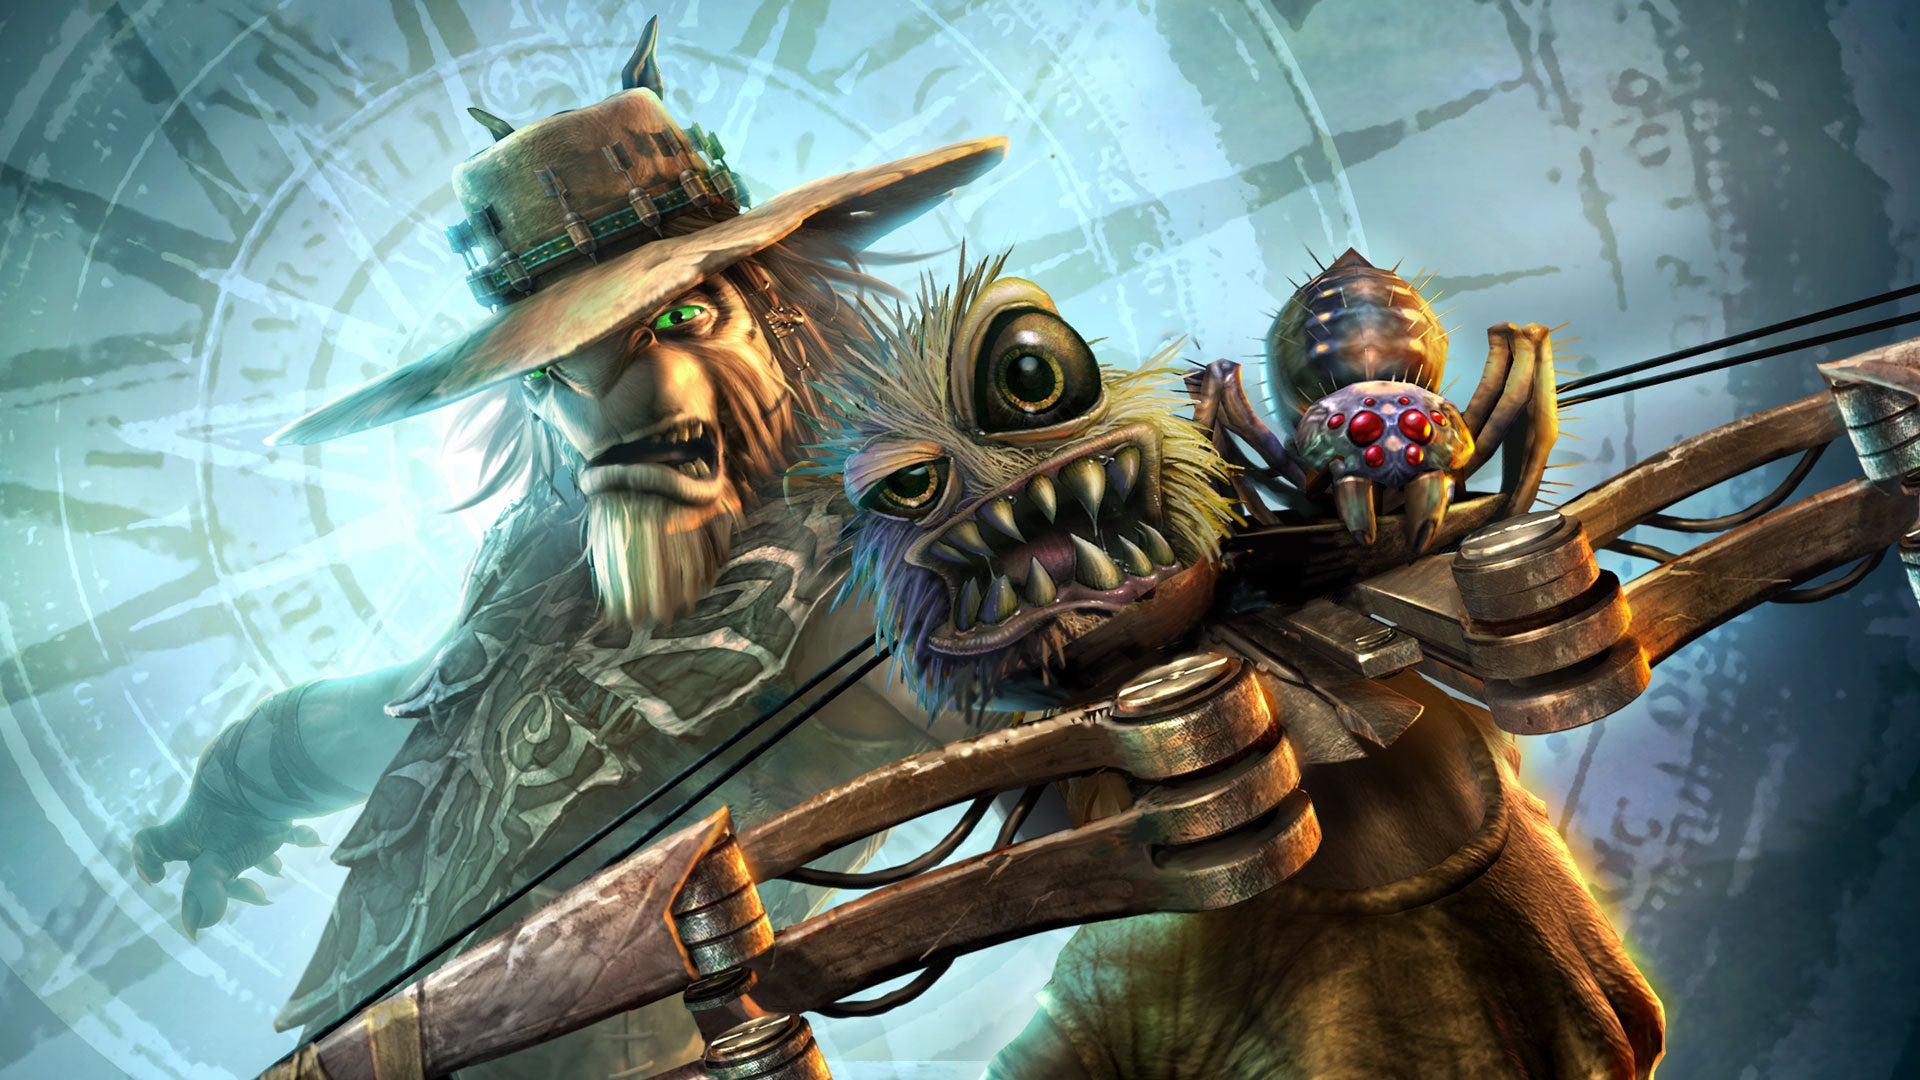 Image for Oddworld: Stranger's Wrath on Switch - A Great Port Of A Classic Game?